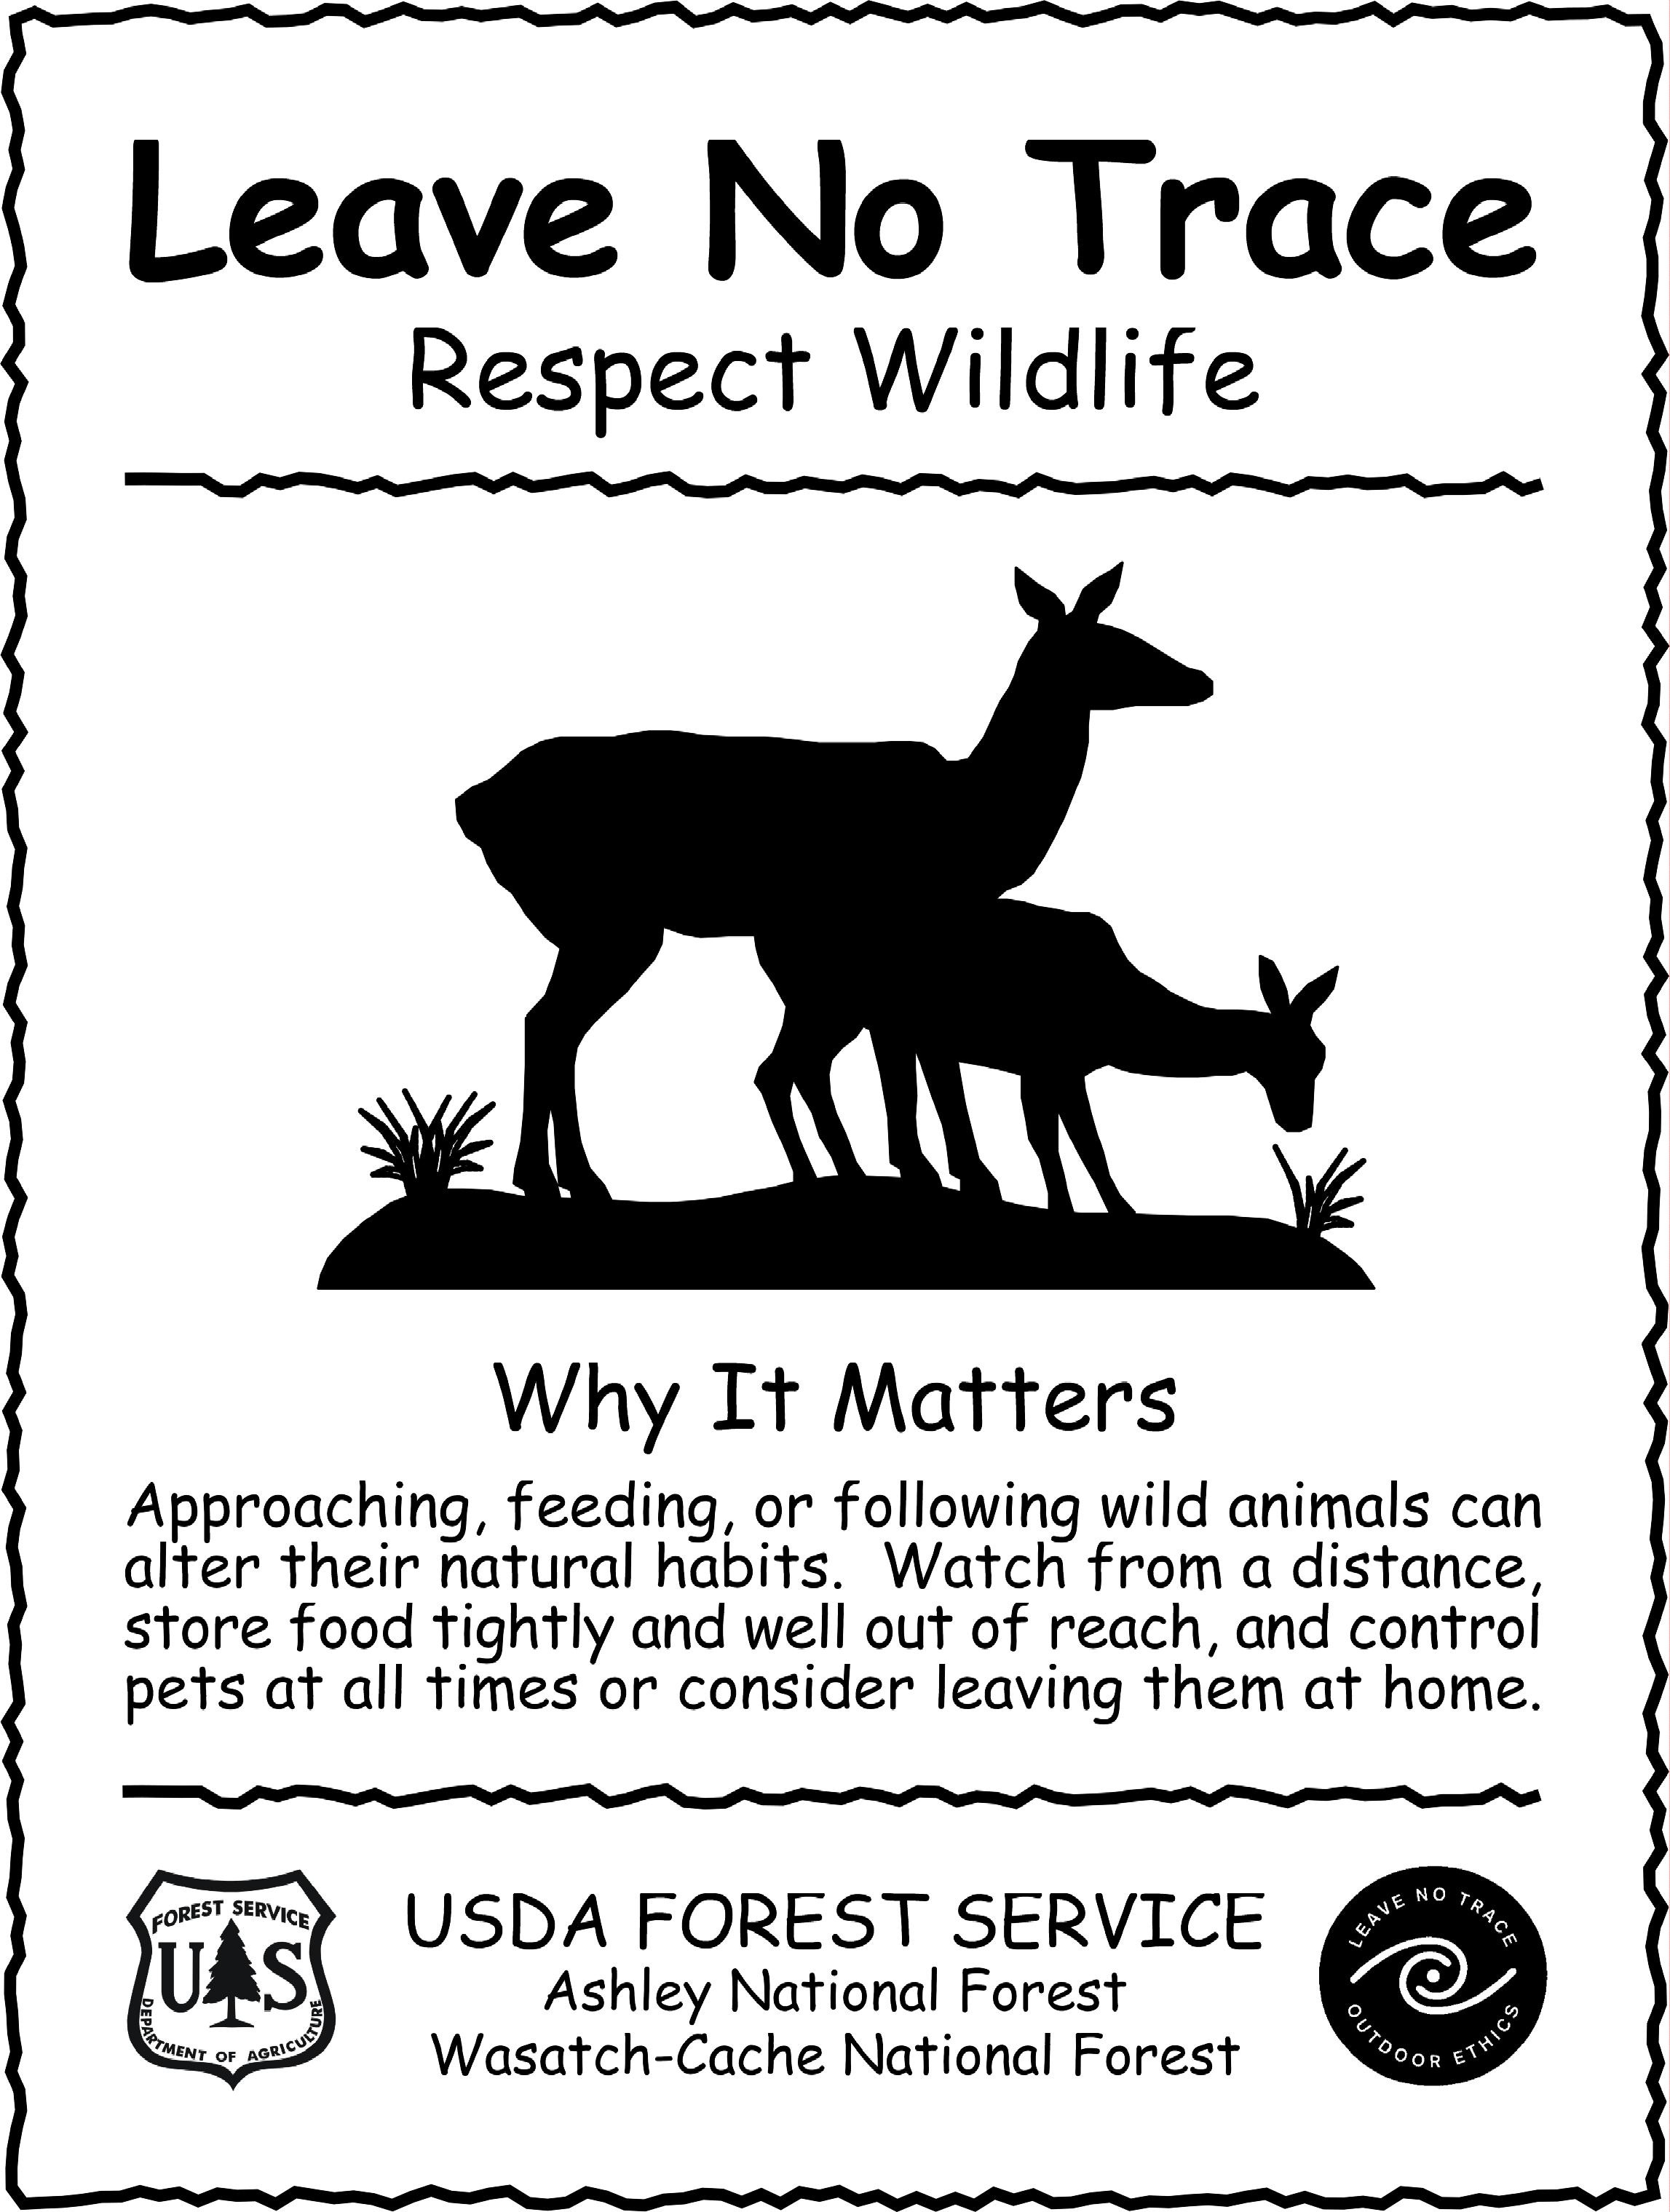 Poster on wildlife protections and conservation